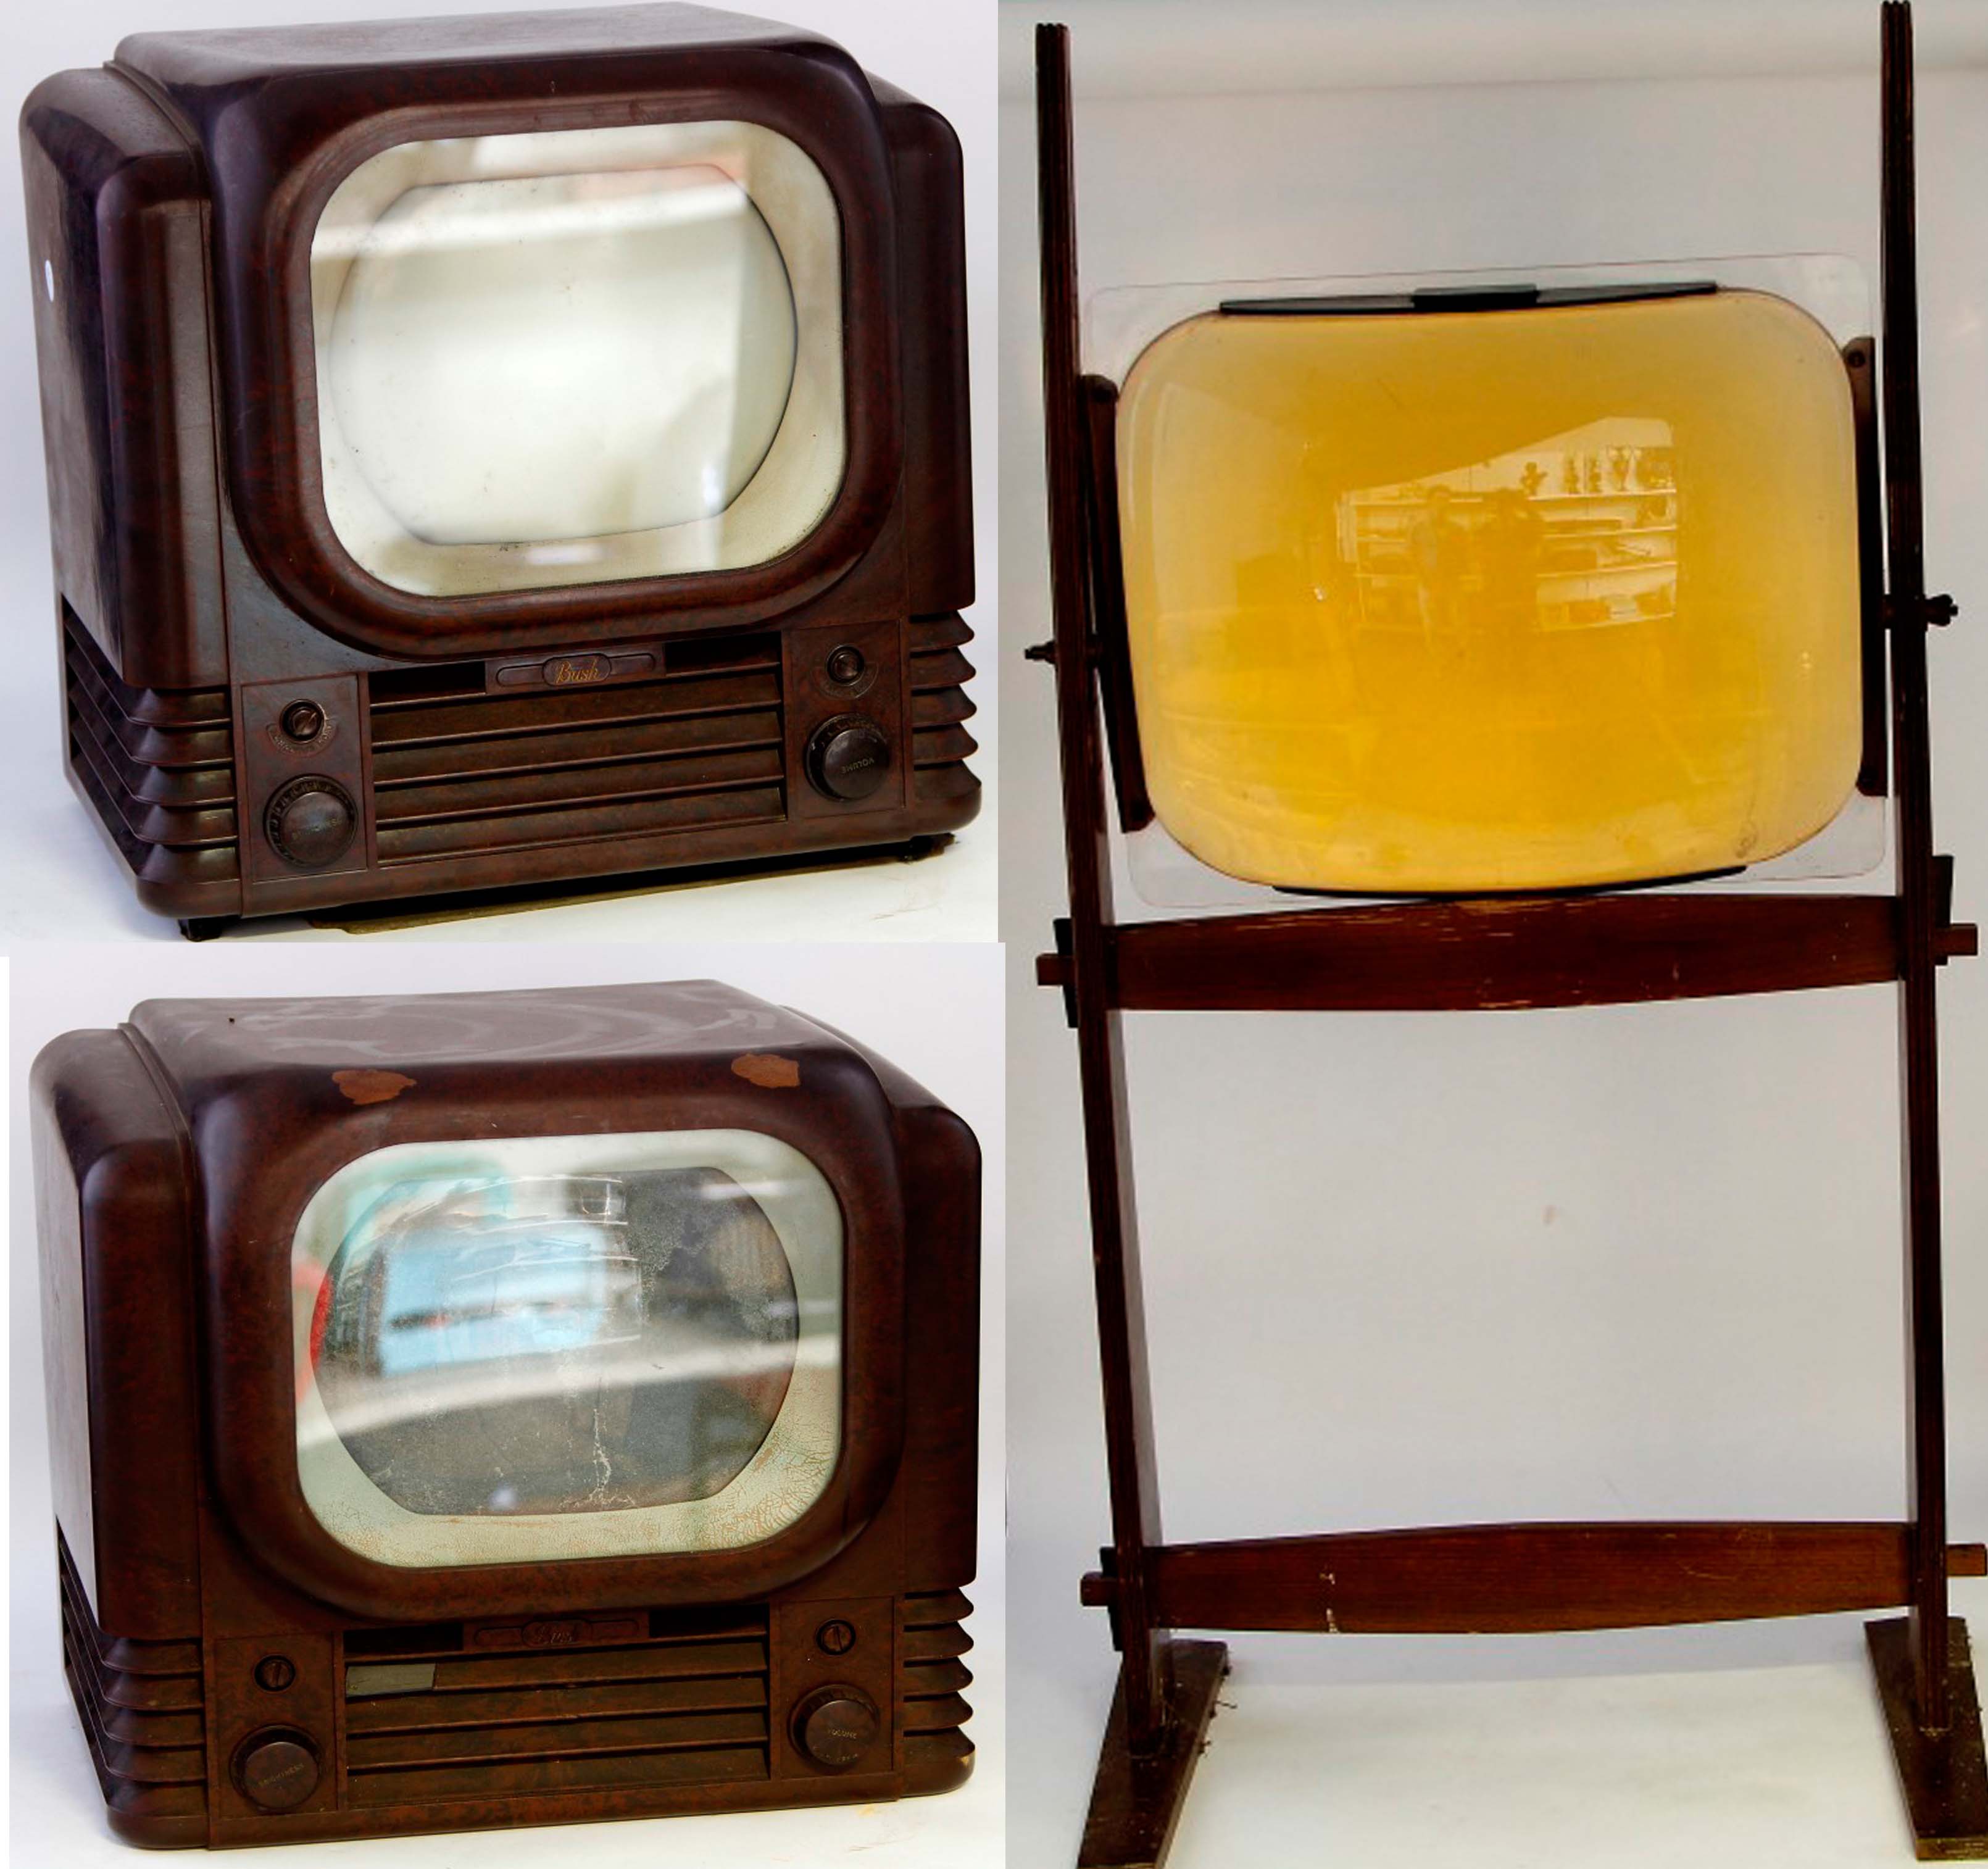 Two 1950s Bush TV22 9" Bakelite cased one channel black and white TVS, together with two screen